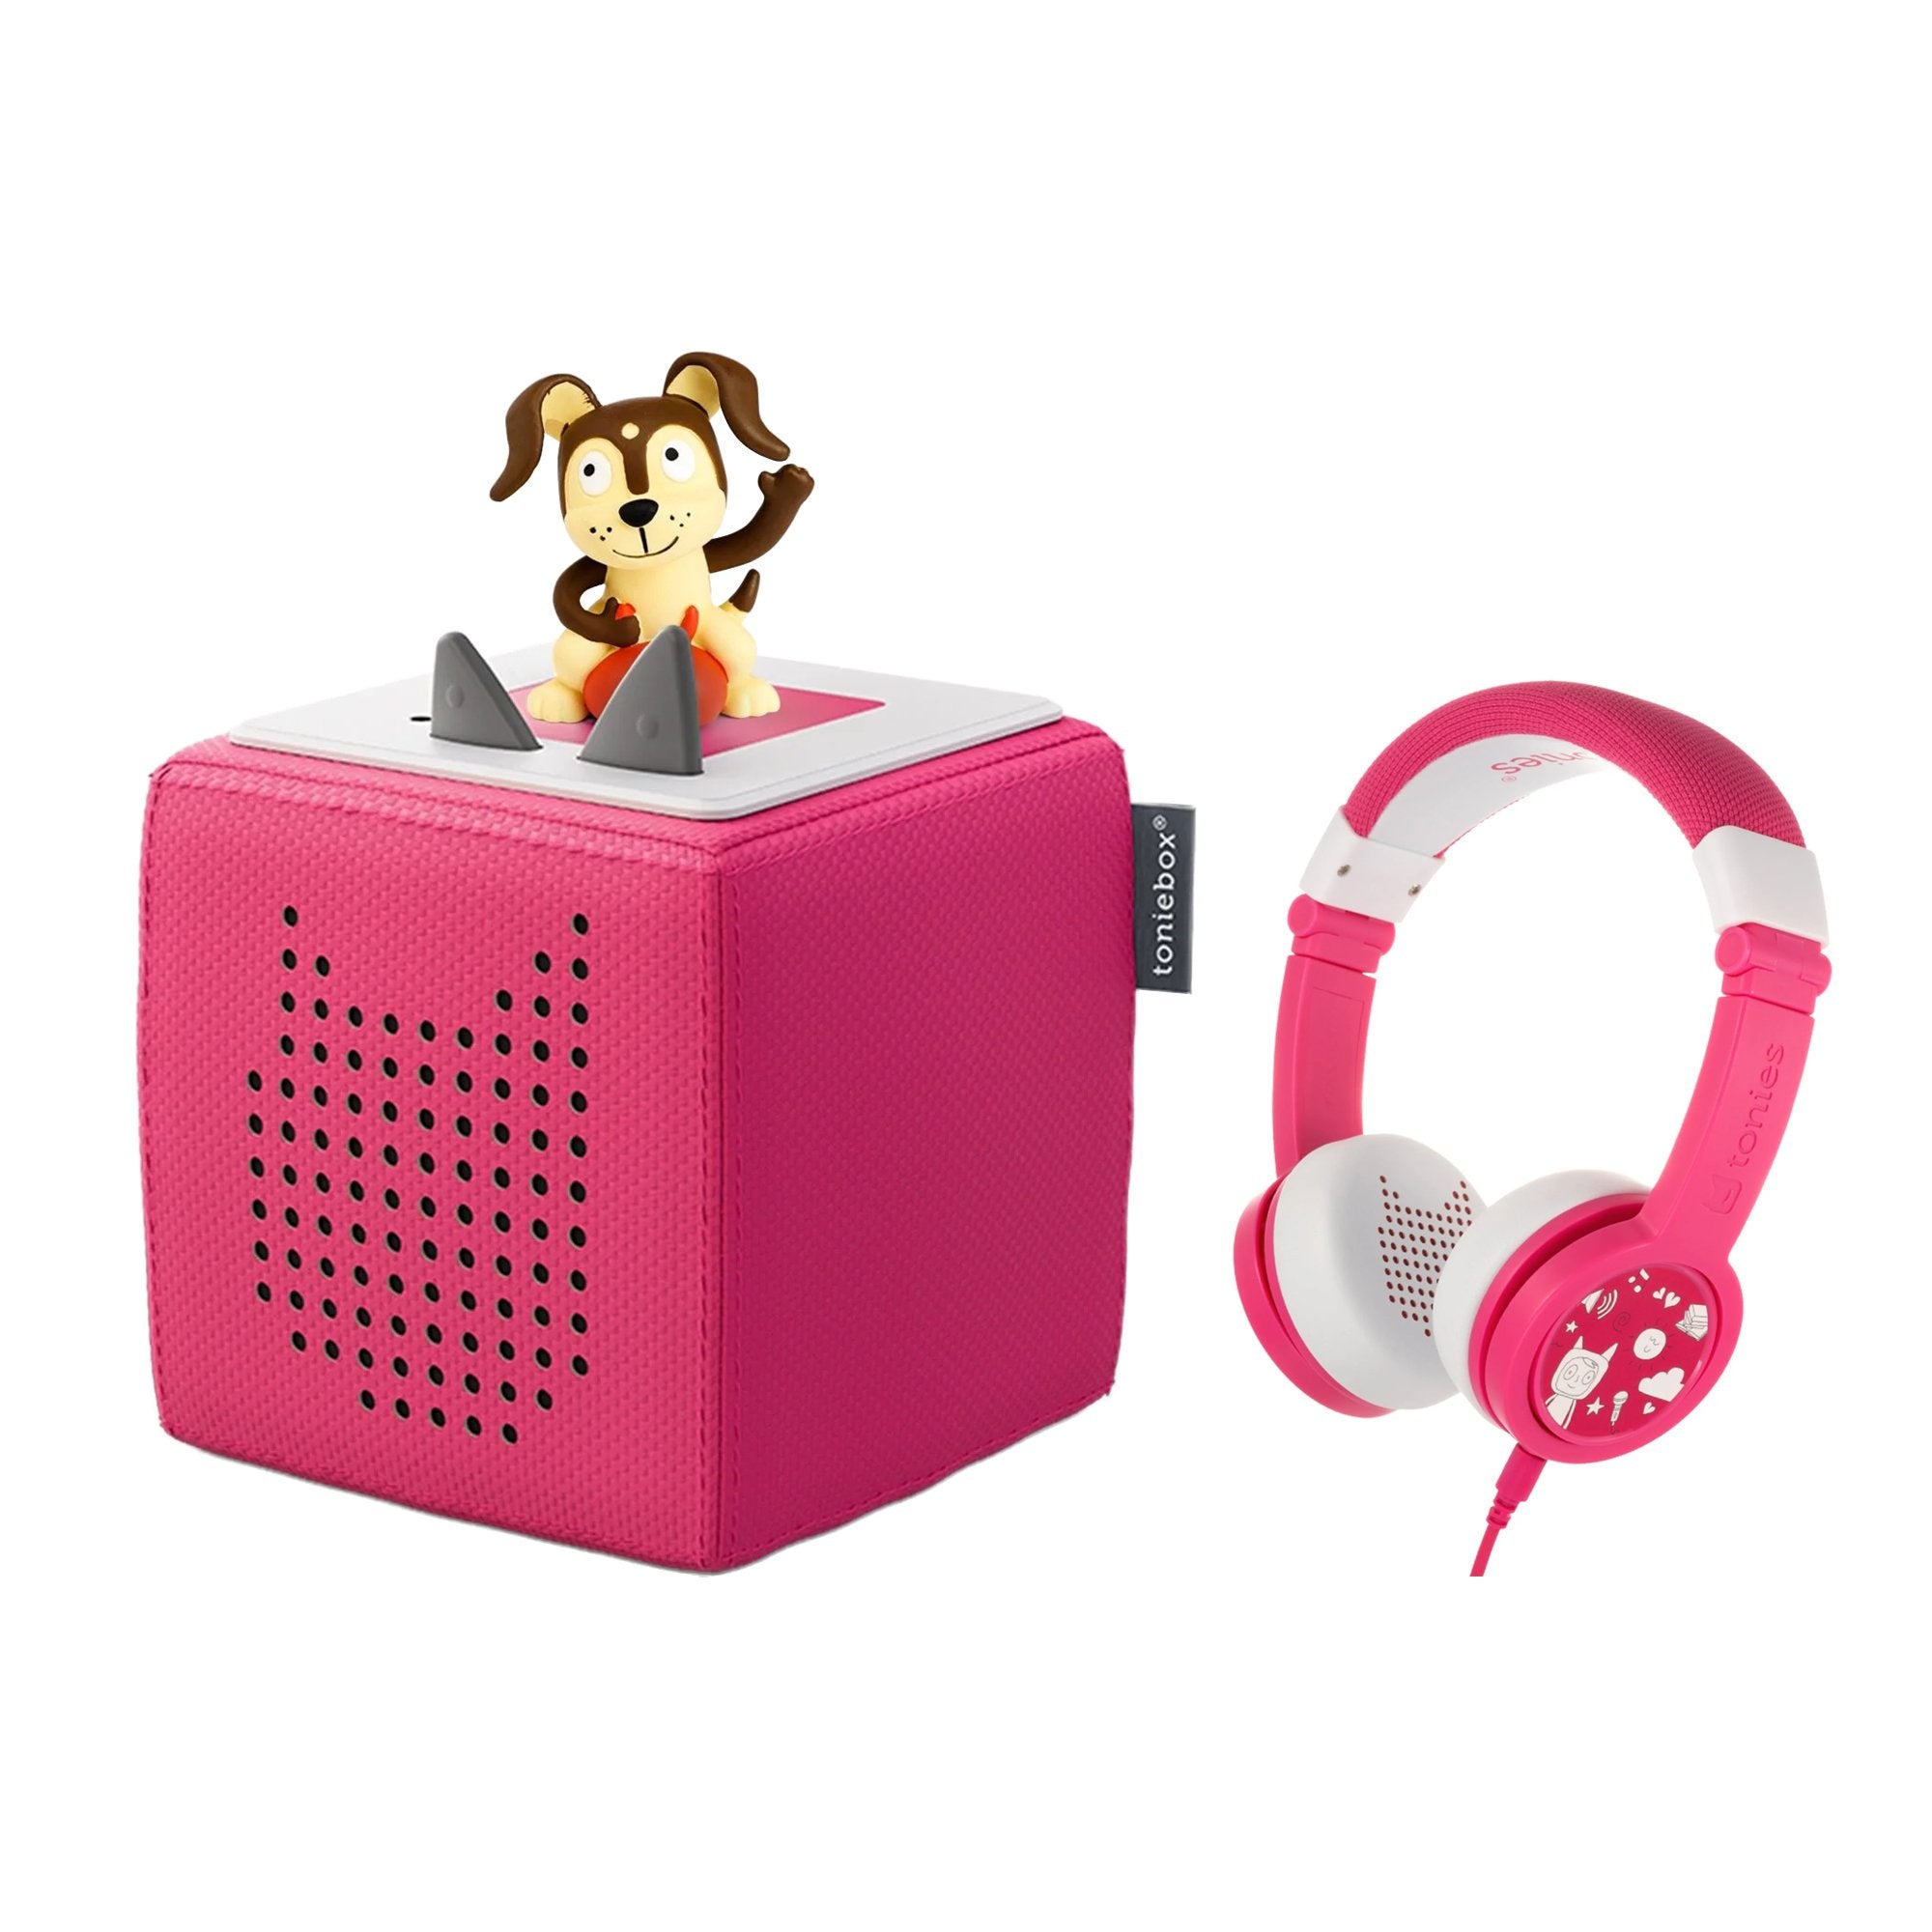 Tonies Toniebox Playtime Puppy Starter Set with Foldable Headphones - Pink